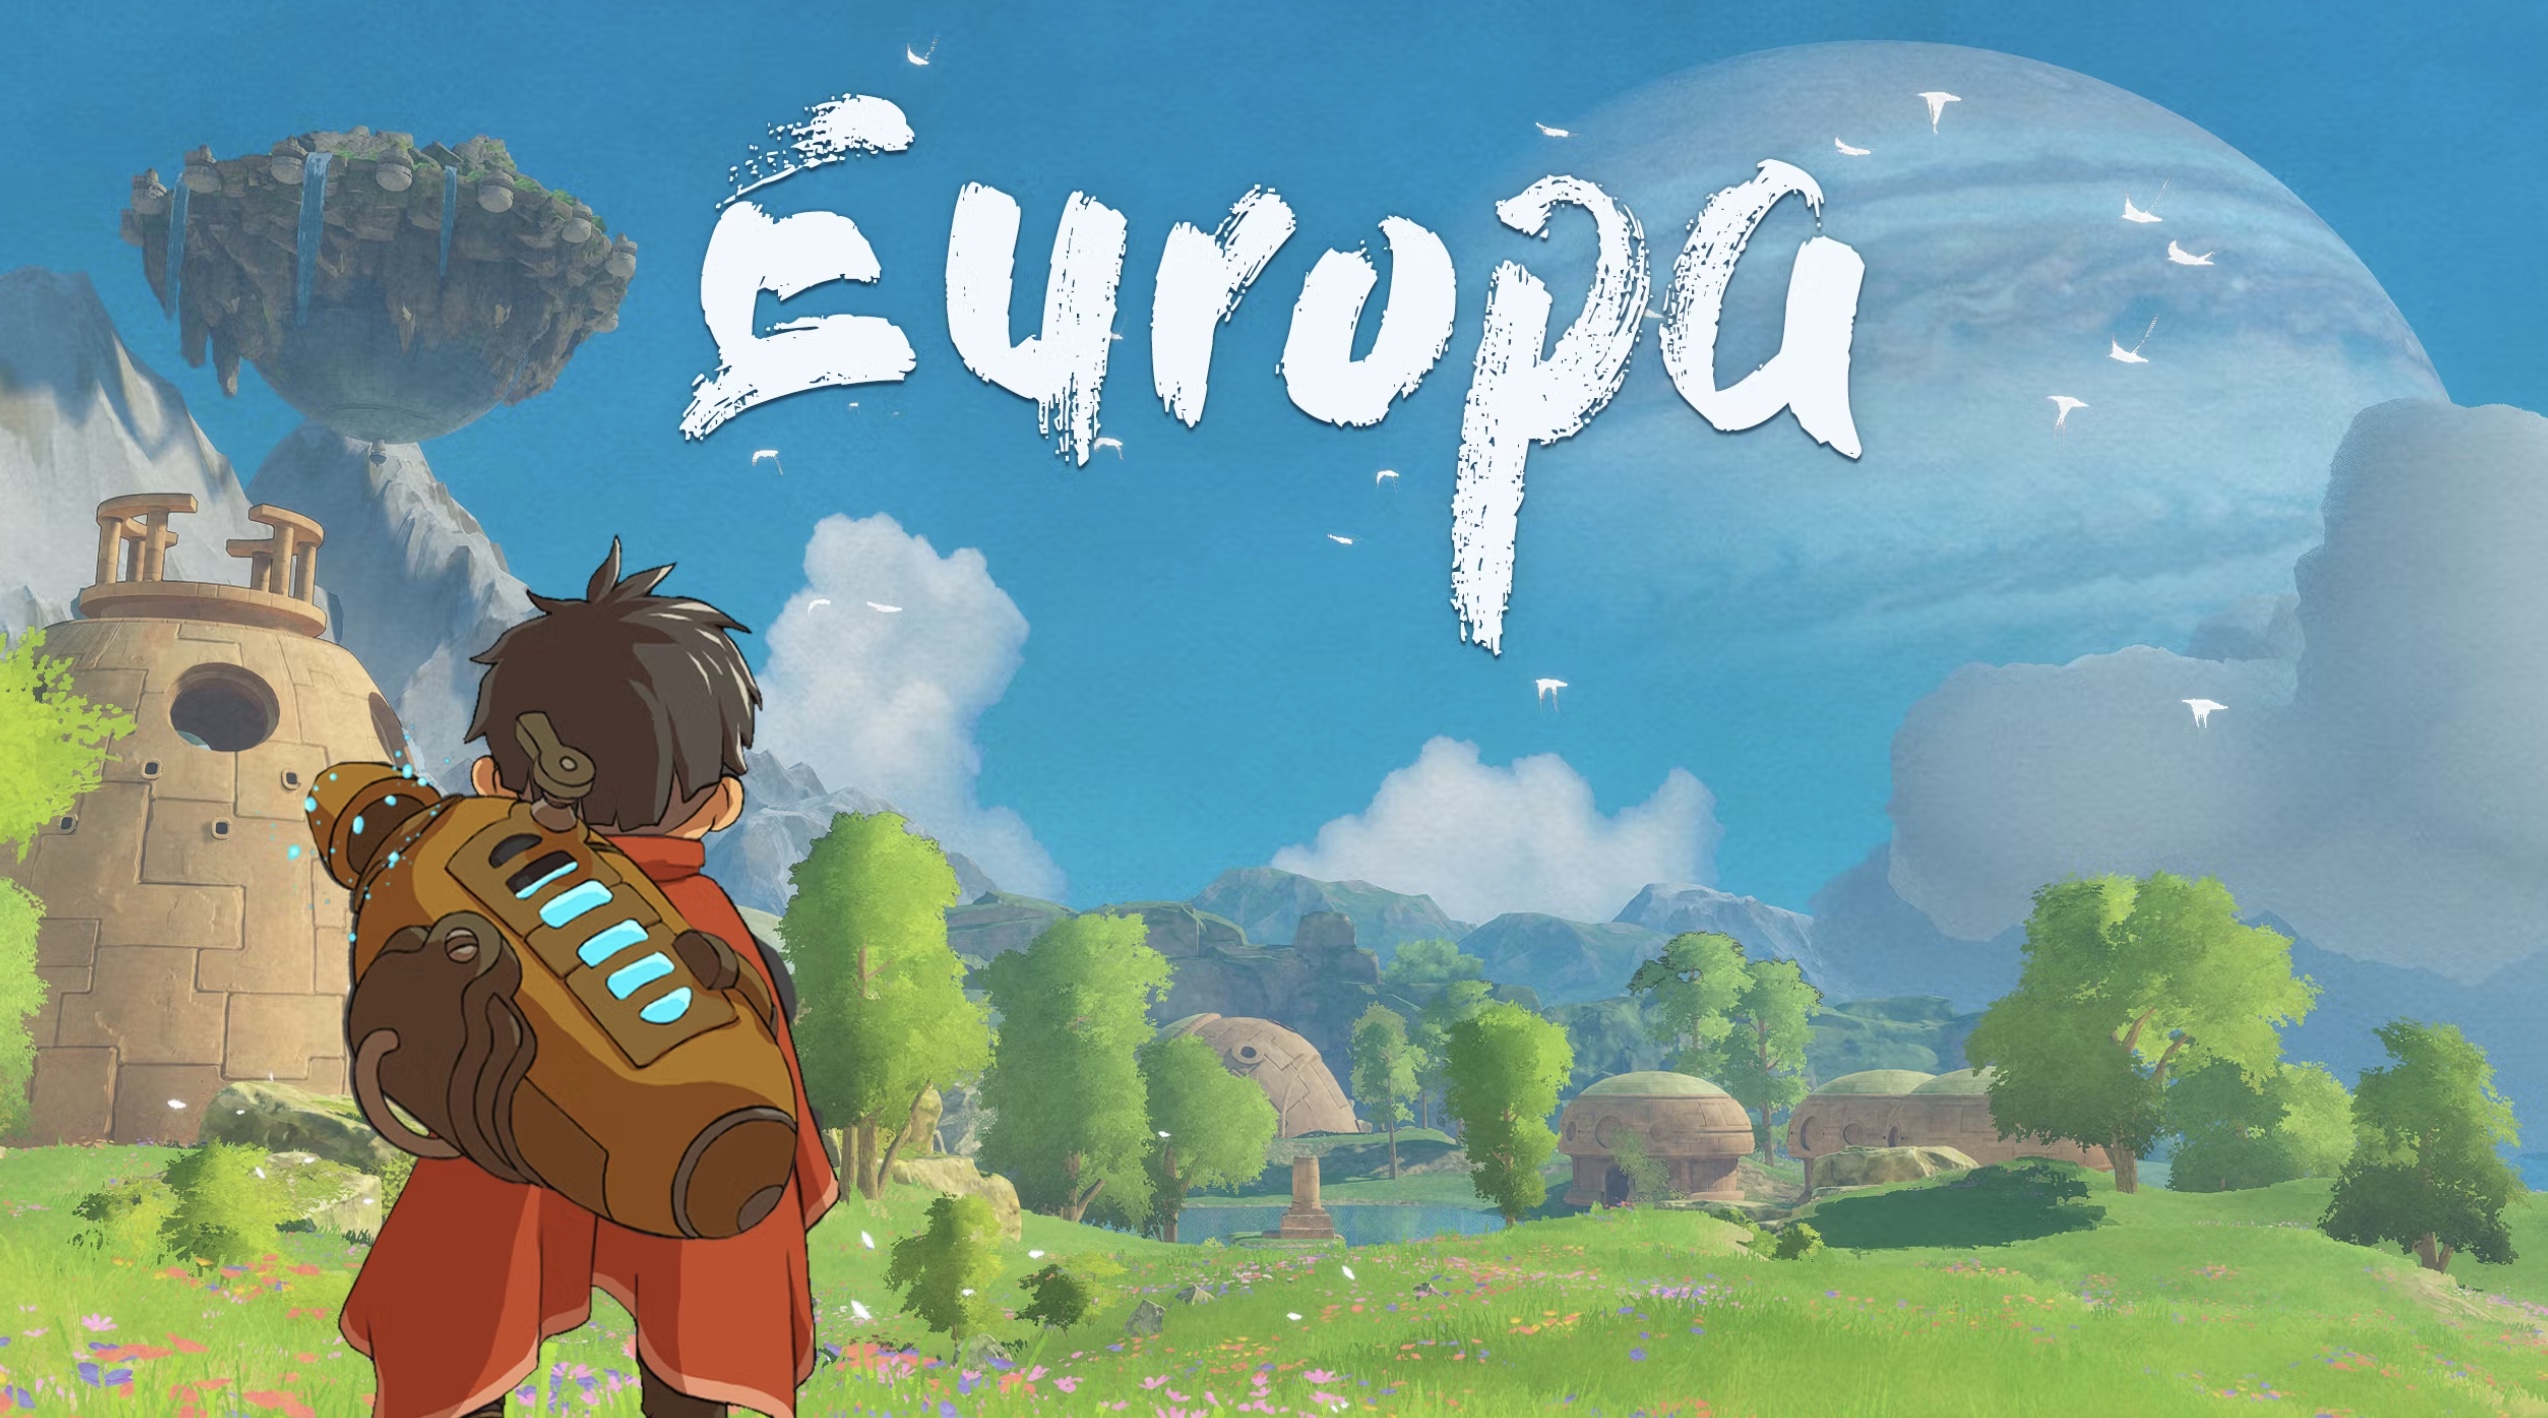 Future Friends & Helder Pinto reveal the Europa game announcement trailer, a peaceful adventure with Studio Ghibli-inspired visuals.